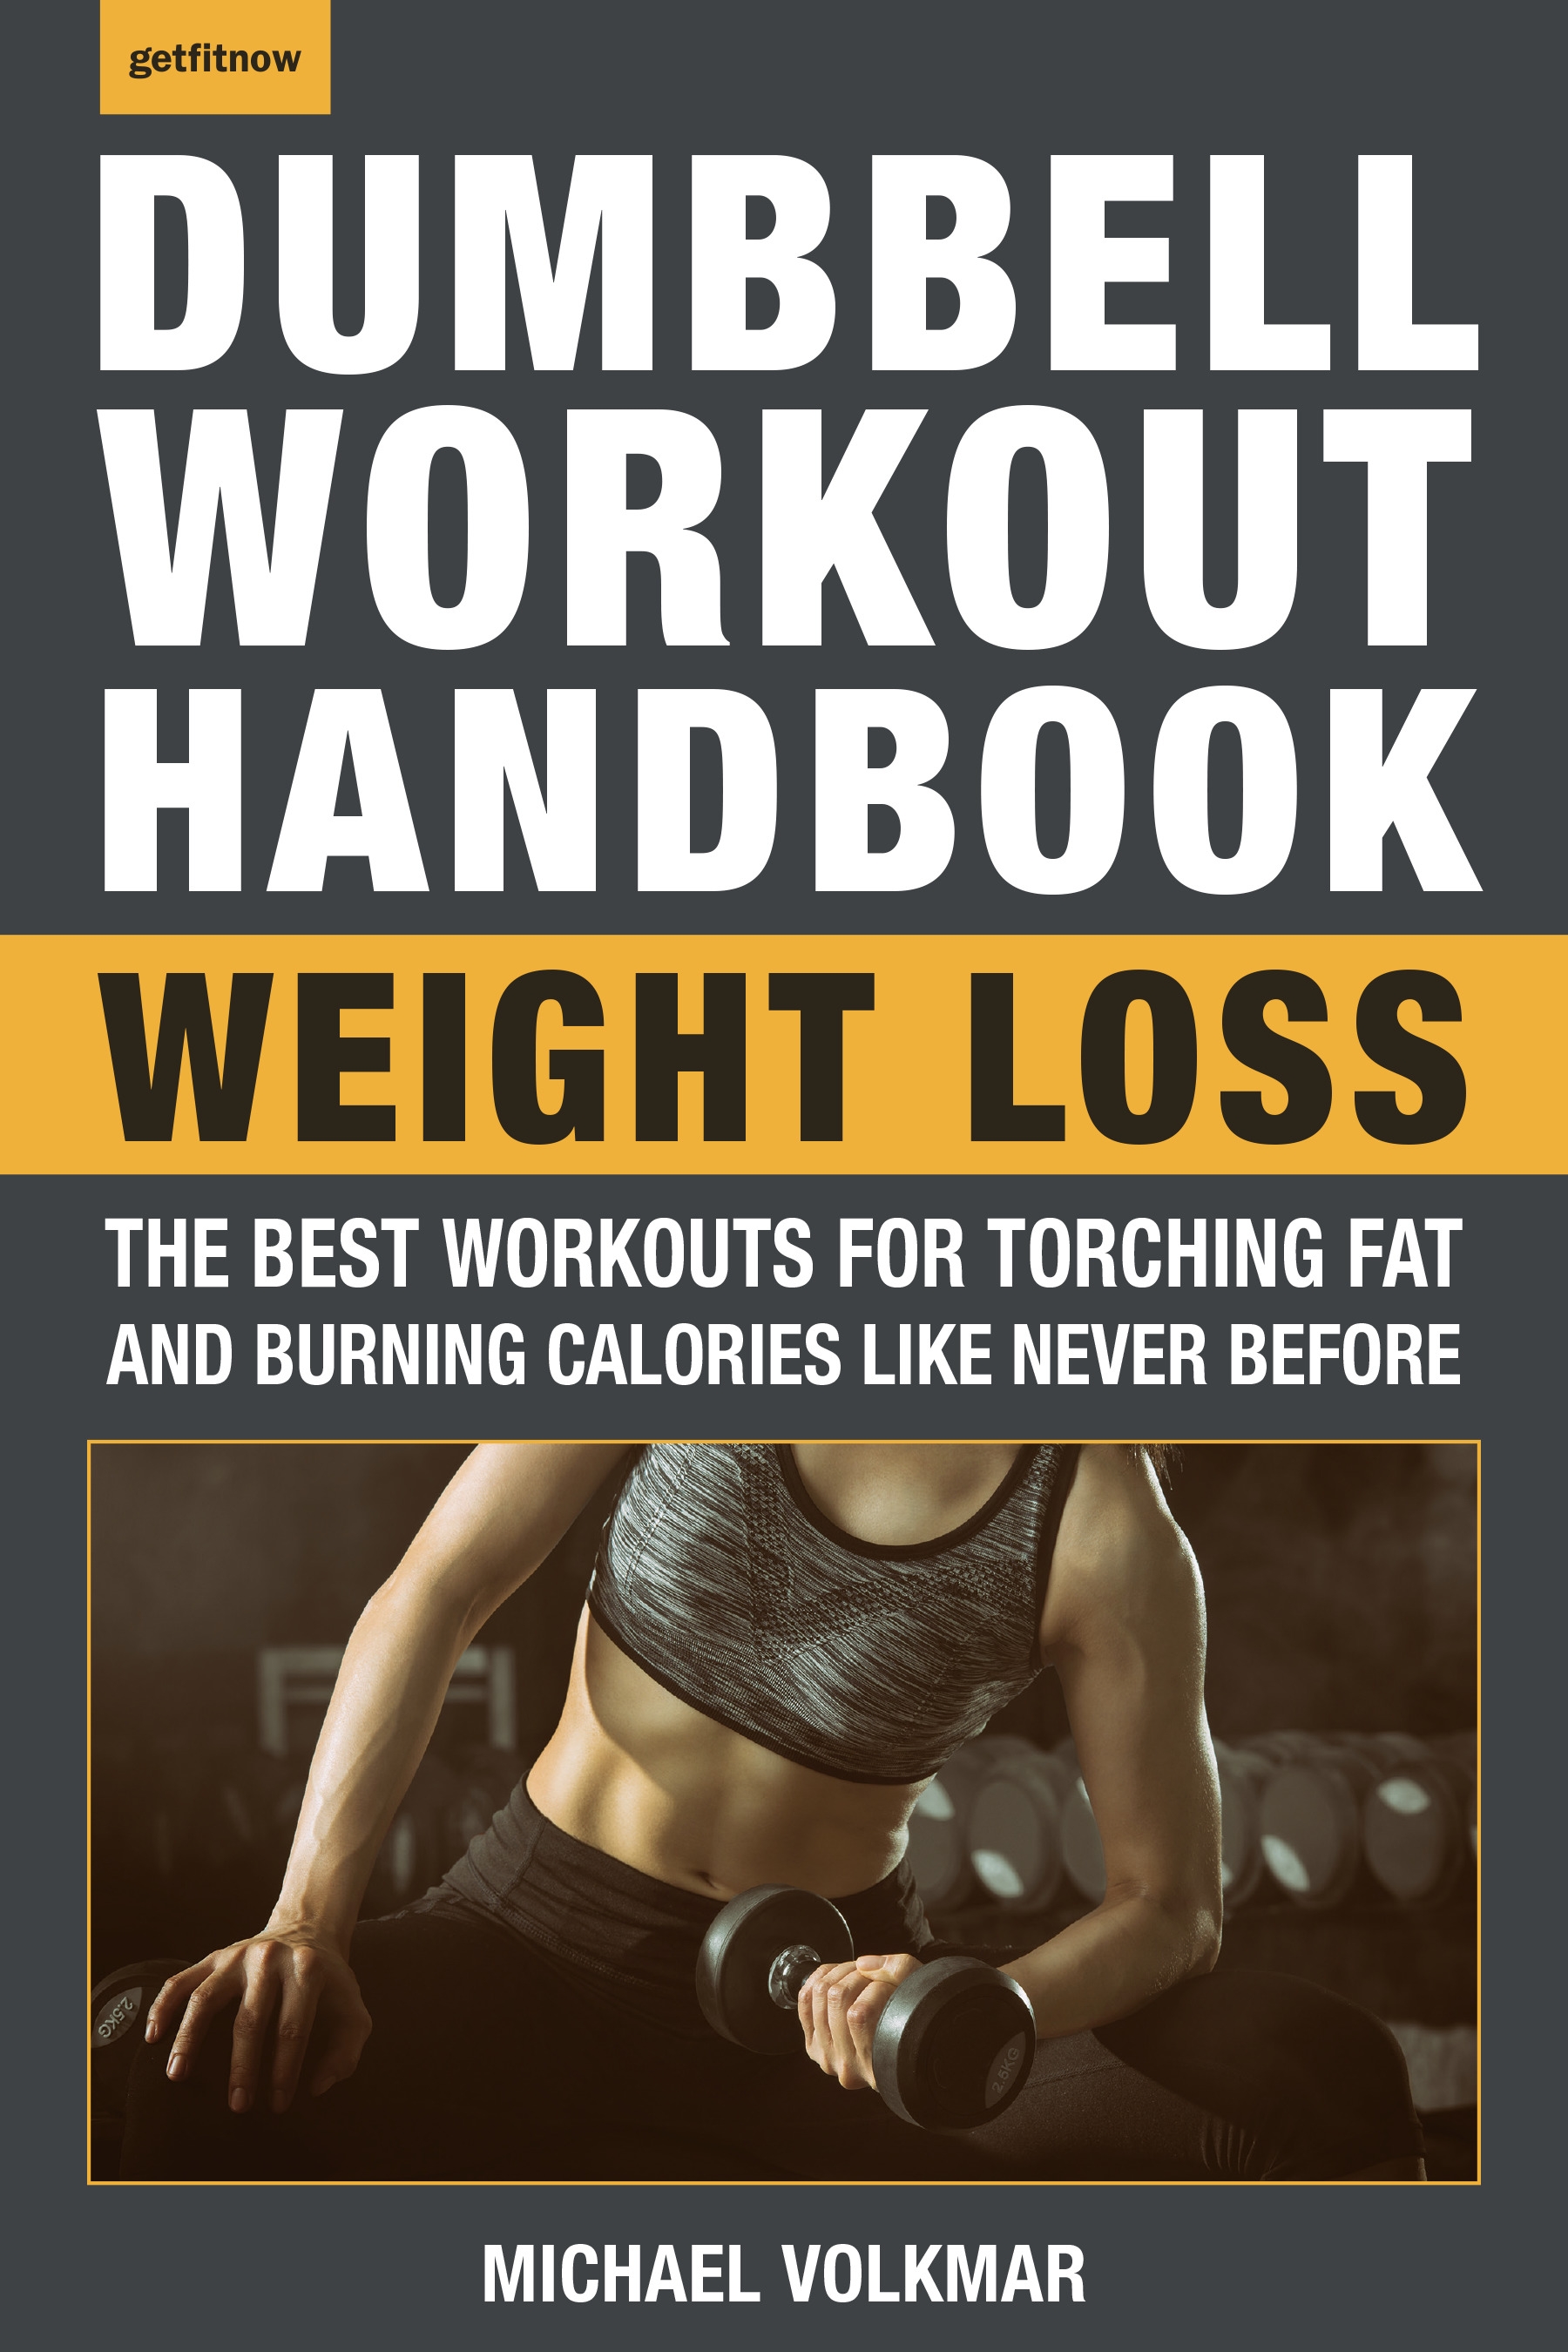 The Dumbbell Workout Handbook: Weight Loss by Michael Volkmar